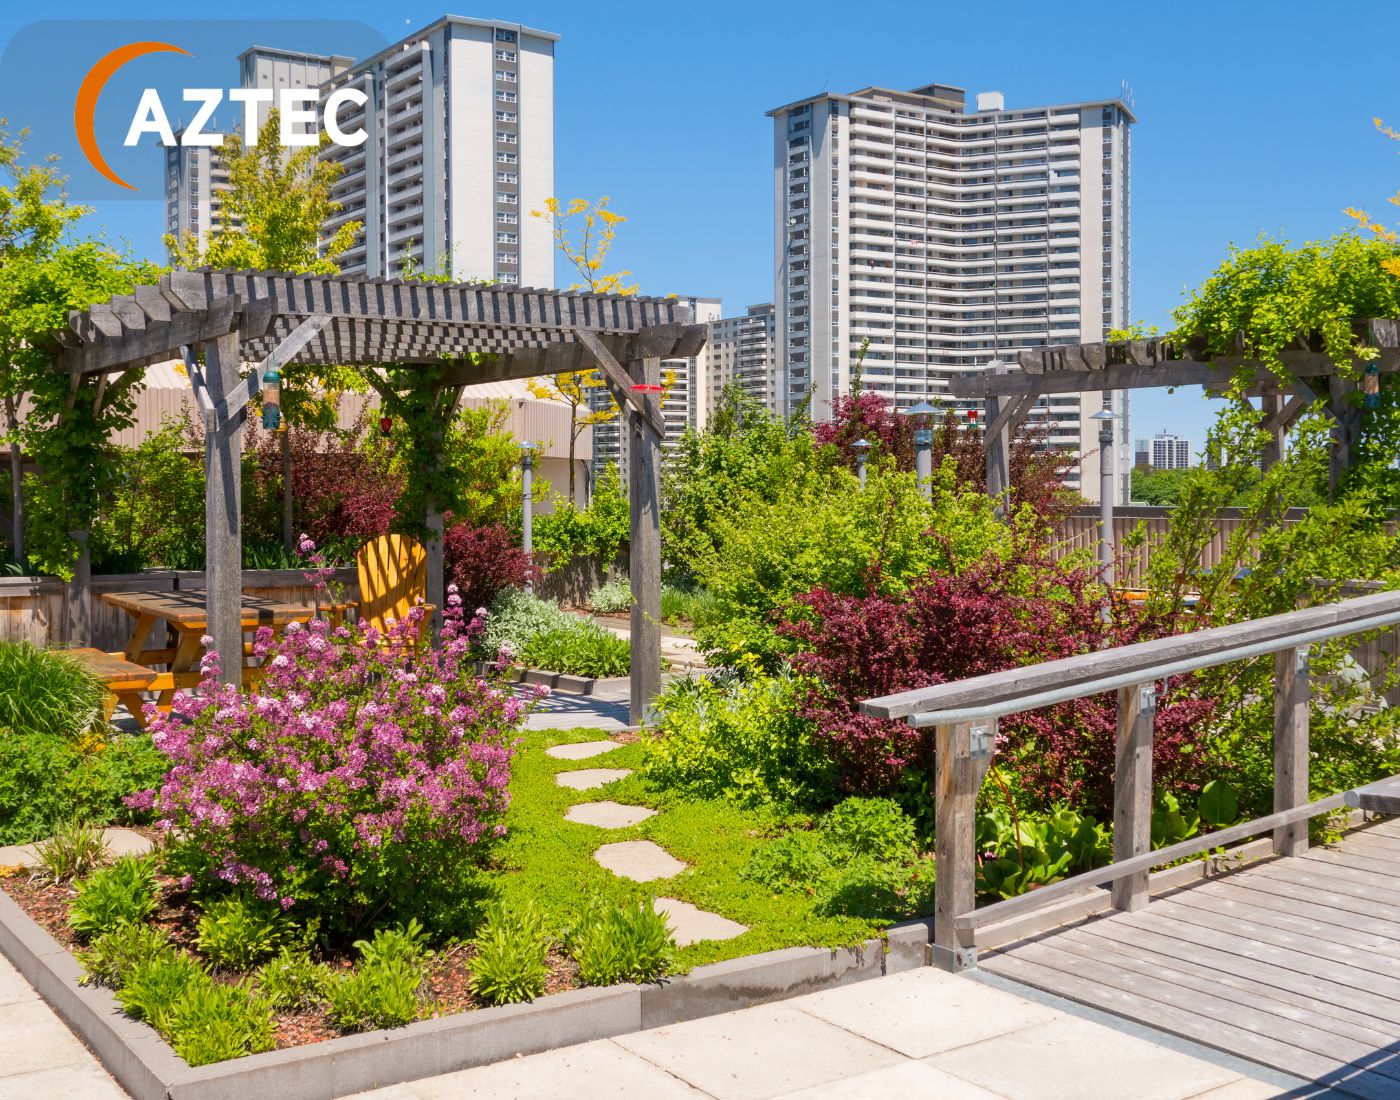 Explore London's rooftop gardens—green sanctuaries in the cityscape, offering environmental benefits and community spaces.